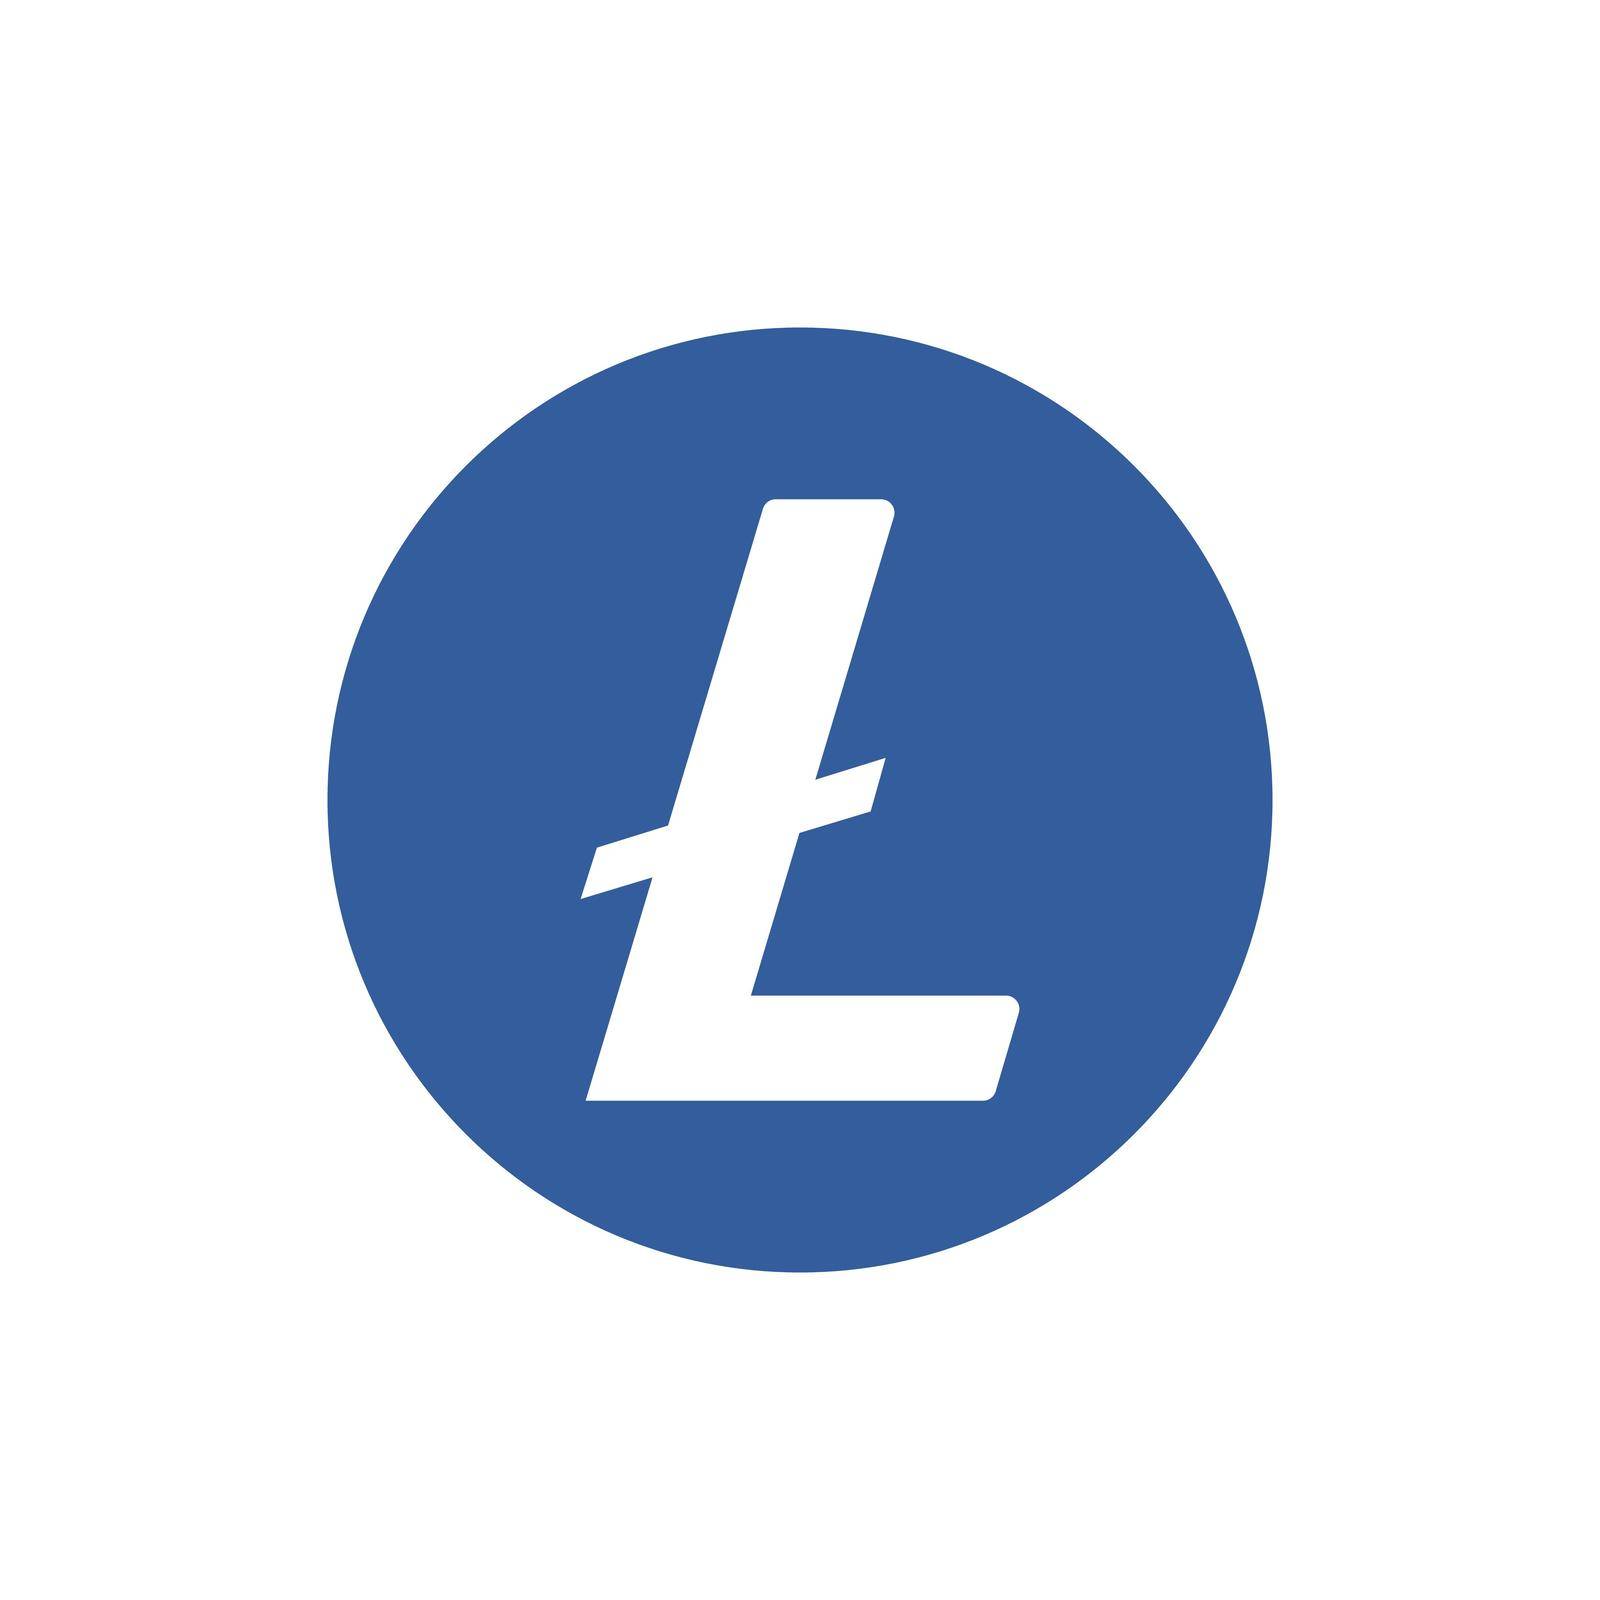 Litecoin LTC coin icon isolated on white background. by windawake